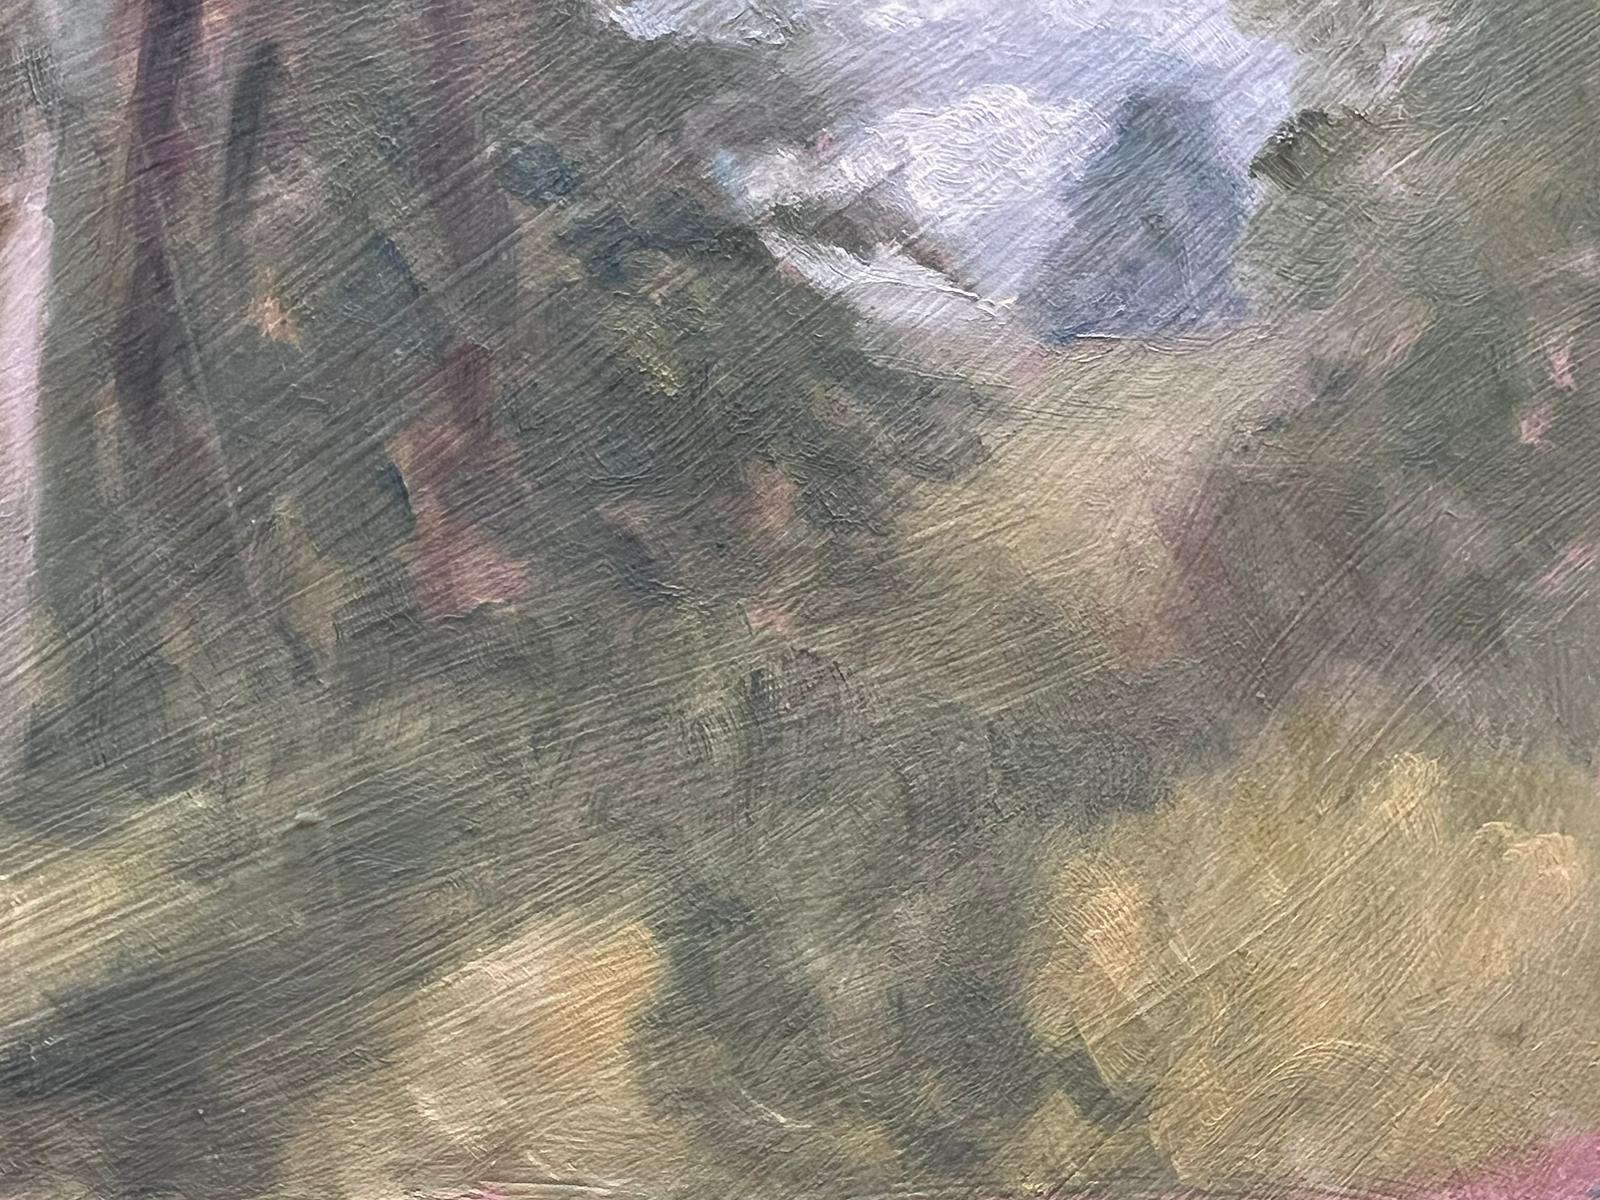 Landscape
by Geza Somerset-Paddon (British 20th century)
oil painting on board, unframed
size: 8.5 x 10 inches
condition: overall very good
provenance: all the paintings we have by this artist have come from their studio sale in England. 